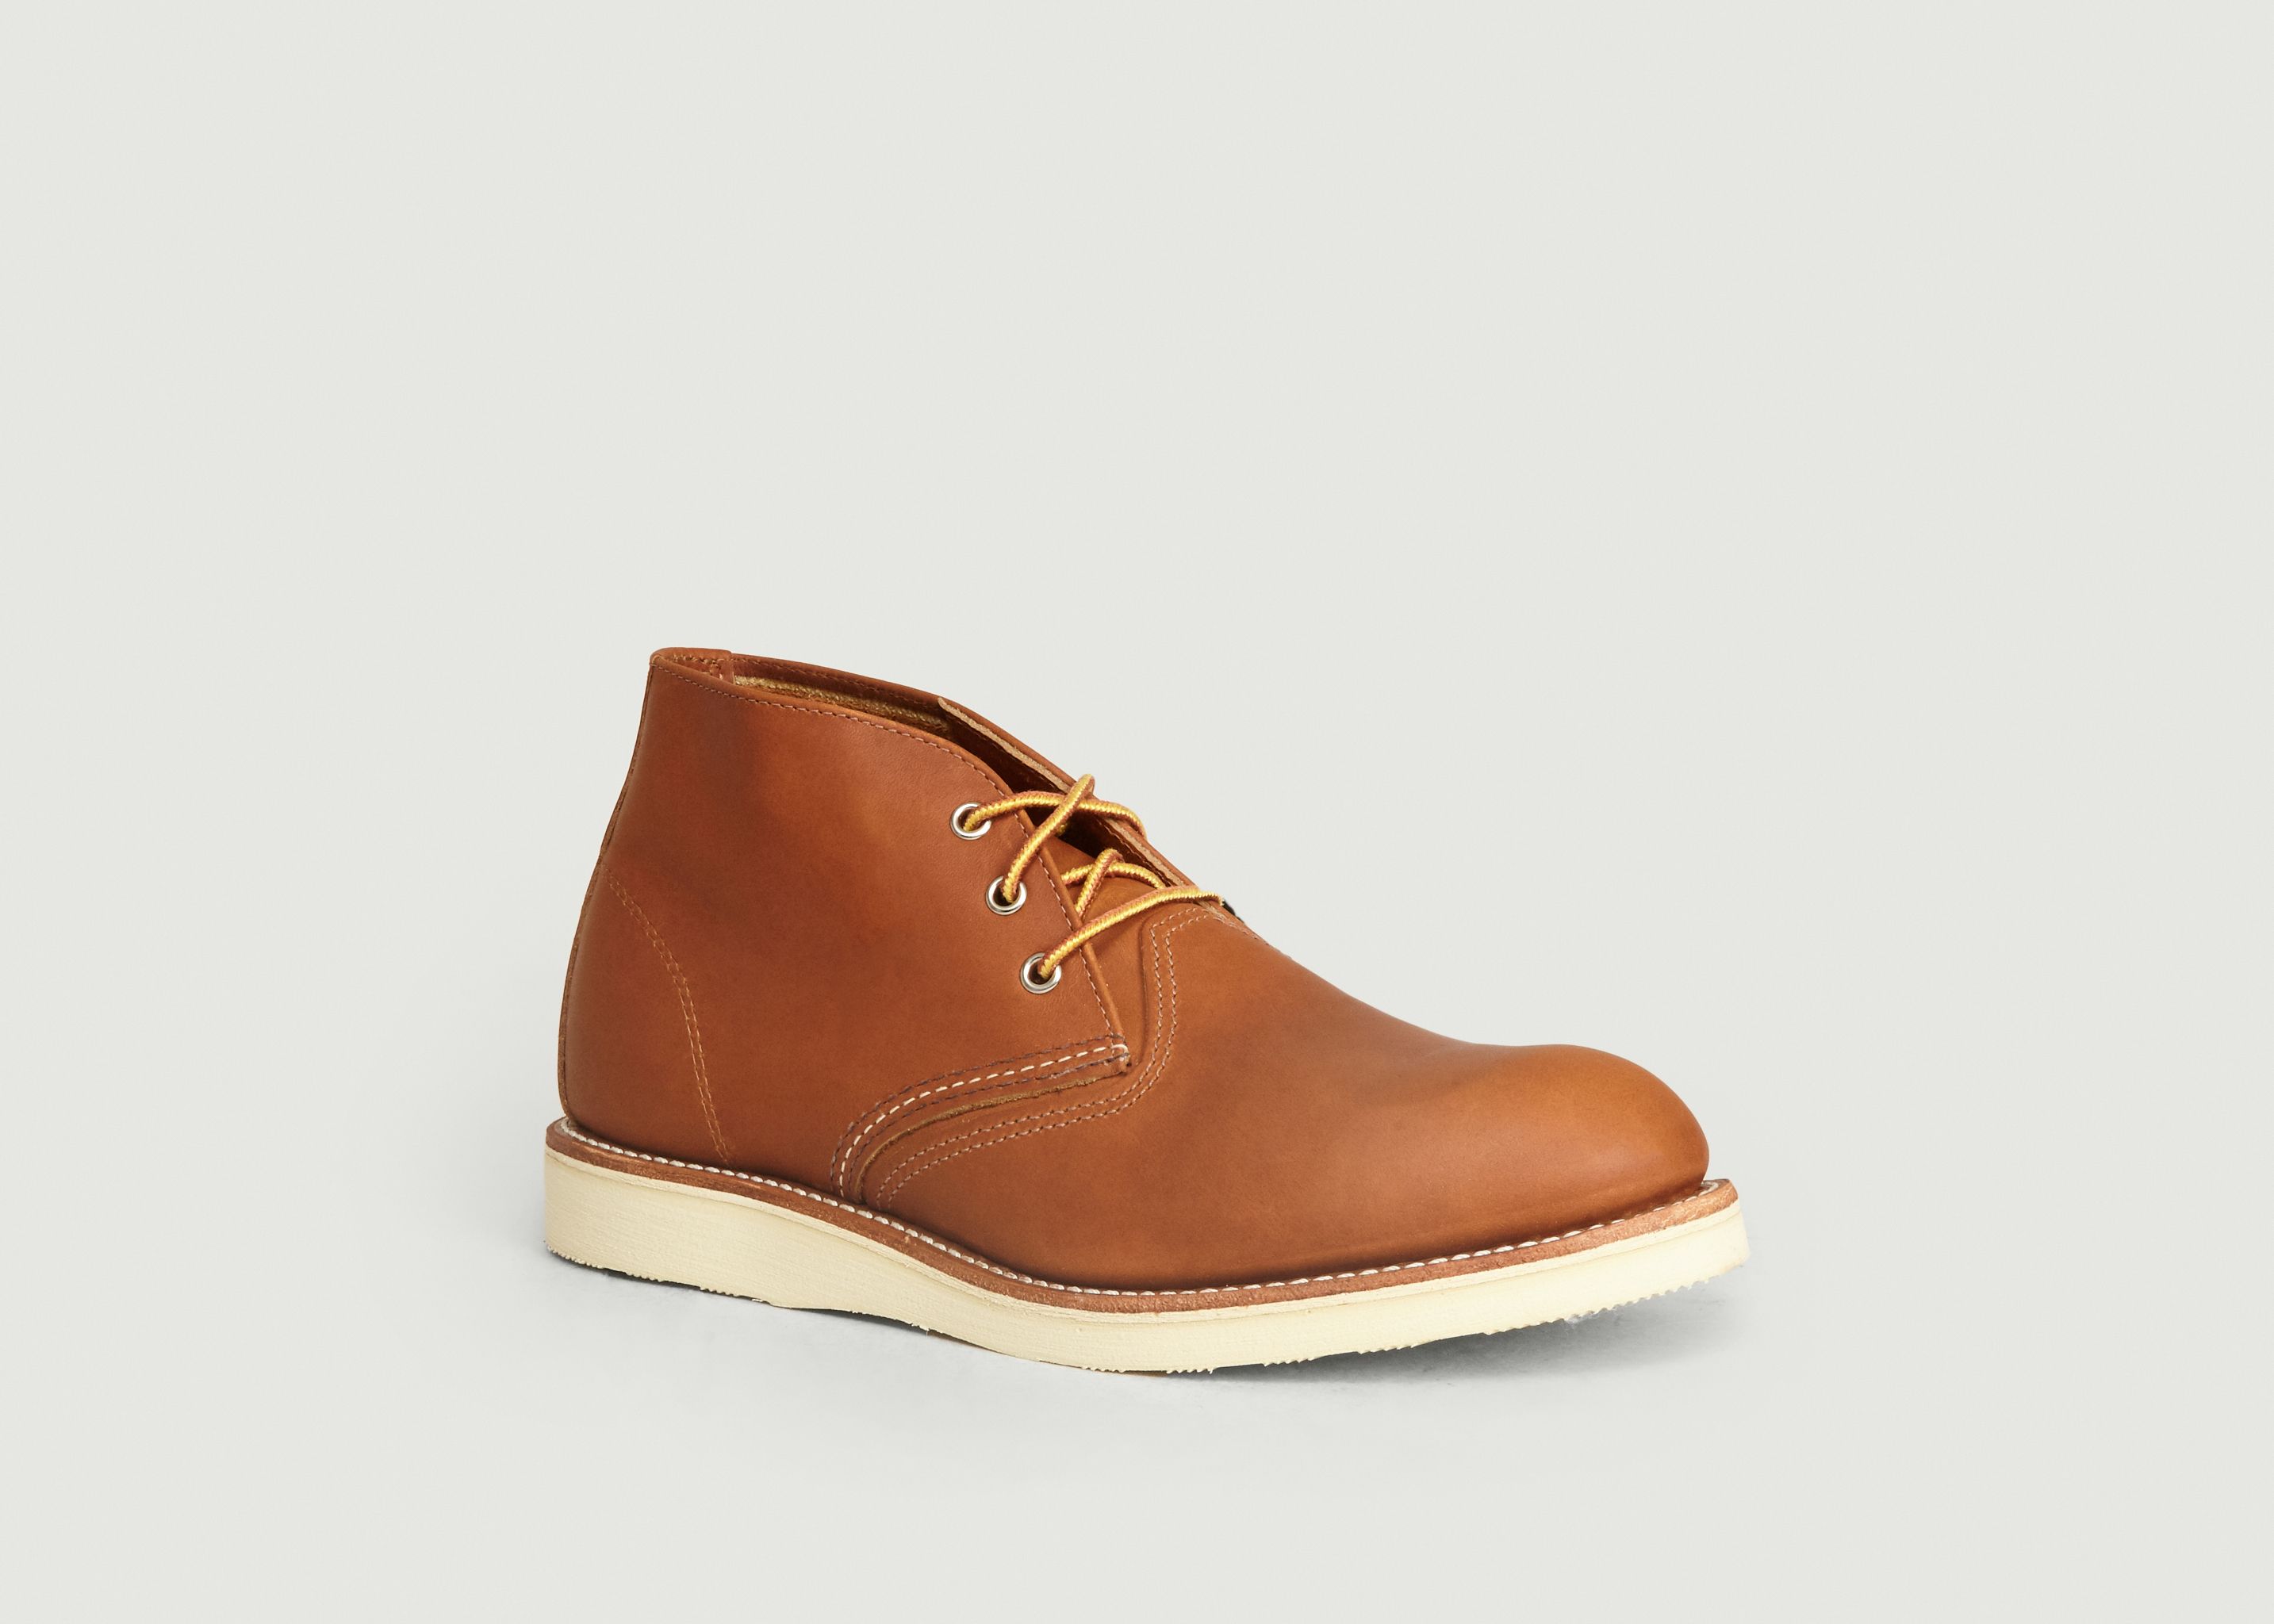 Work Chukka Oro-iginal Camel Boots - Red Wing Shoes